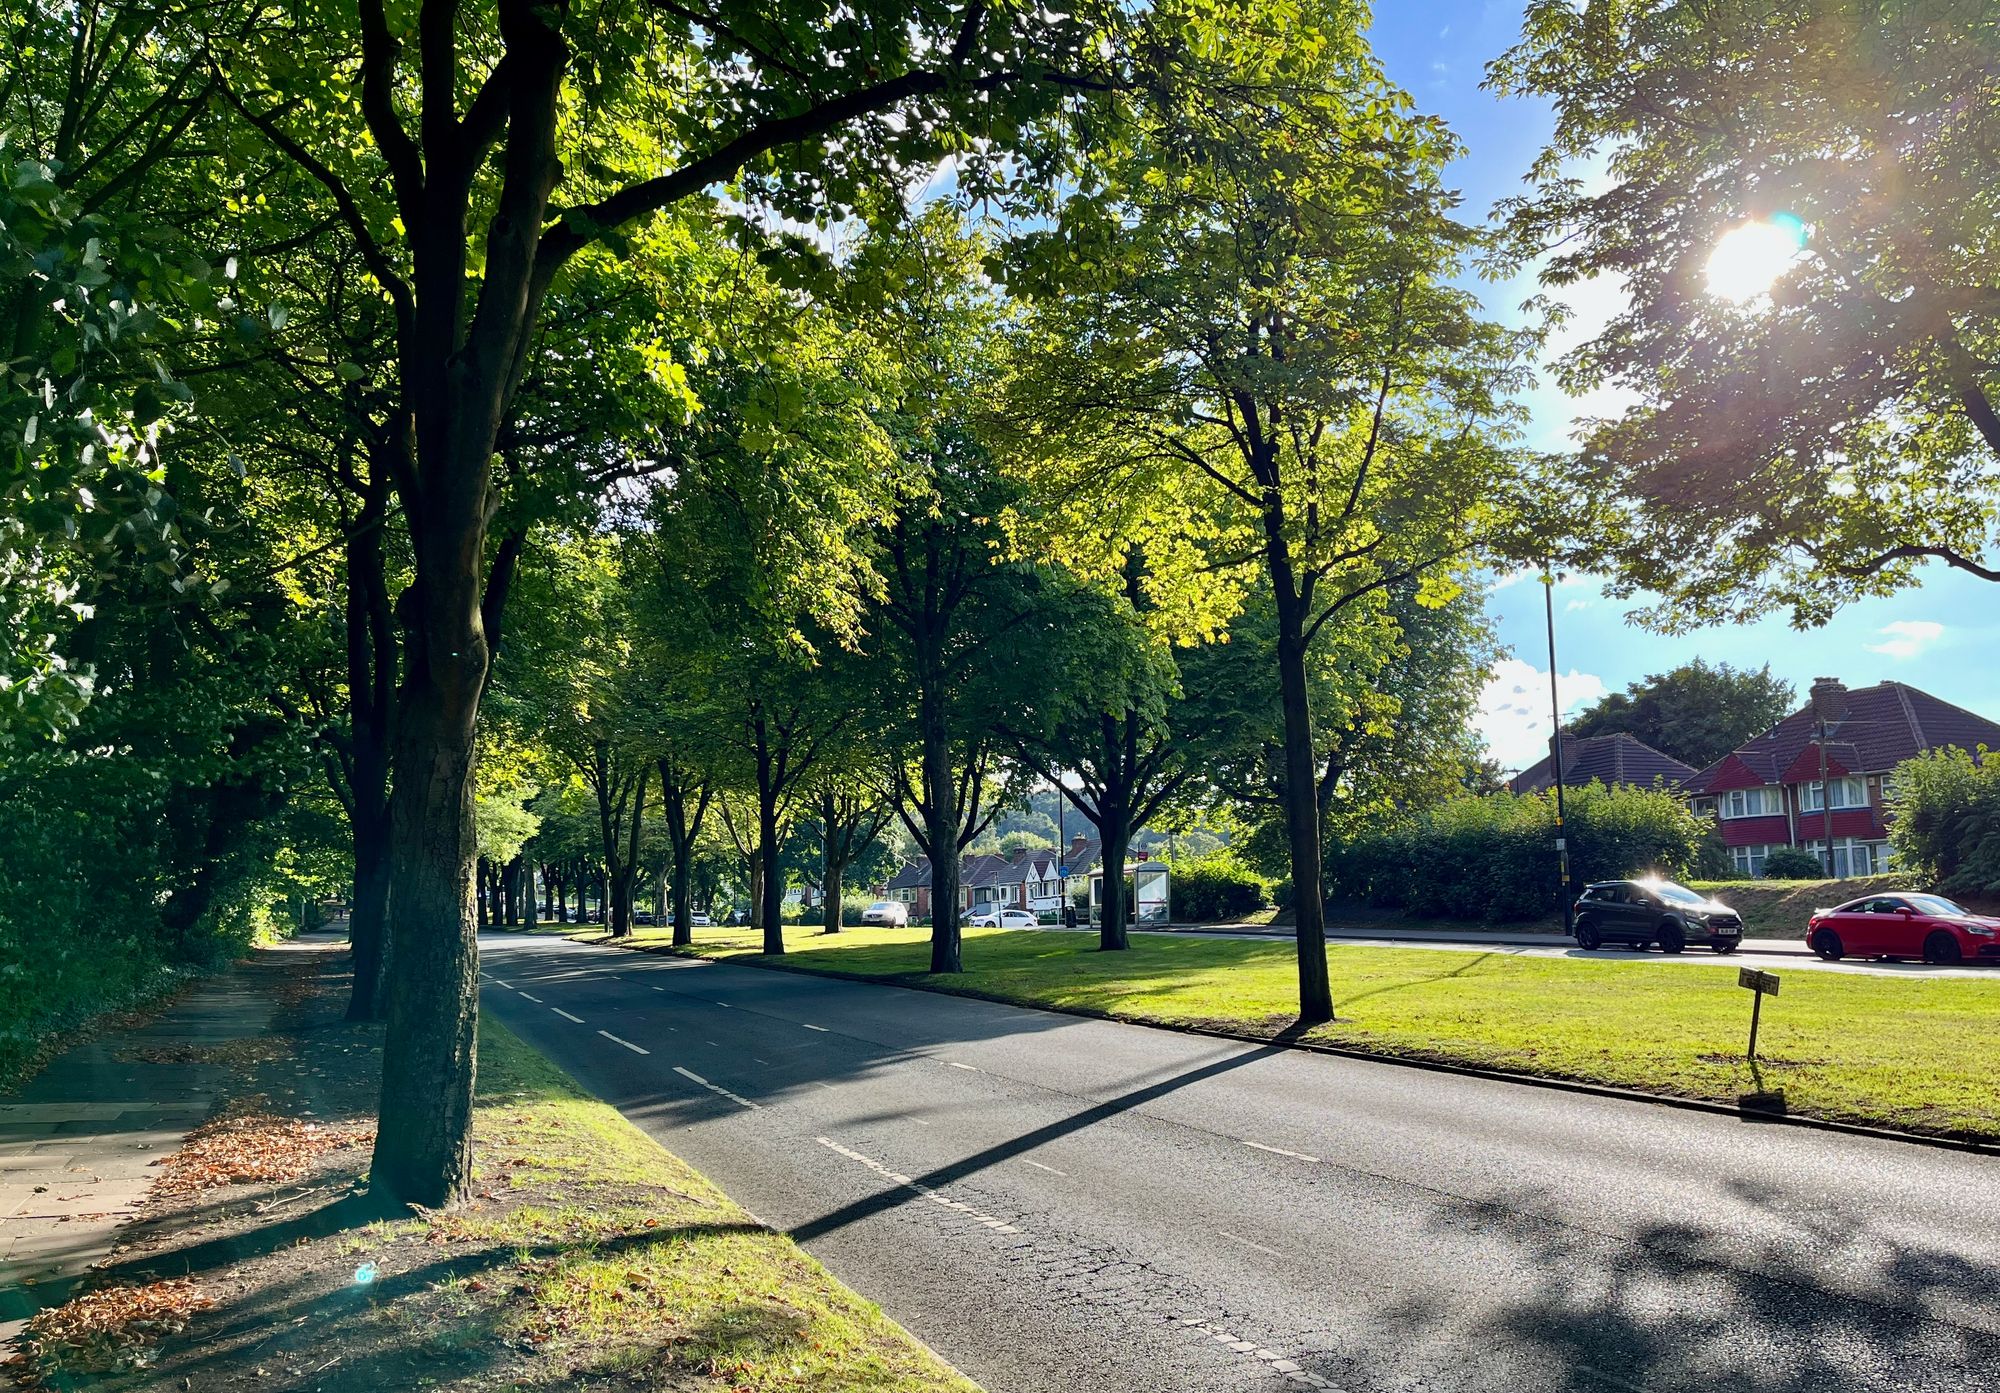 A tree-lined road. The sun peeks through the leaves, casting long, diagonal shadows